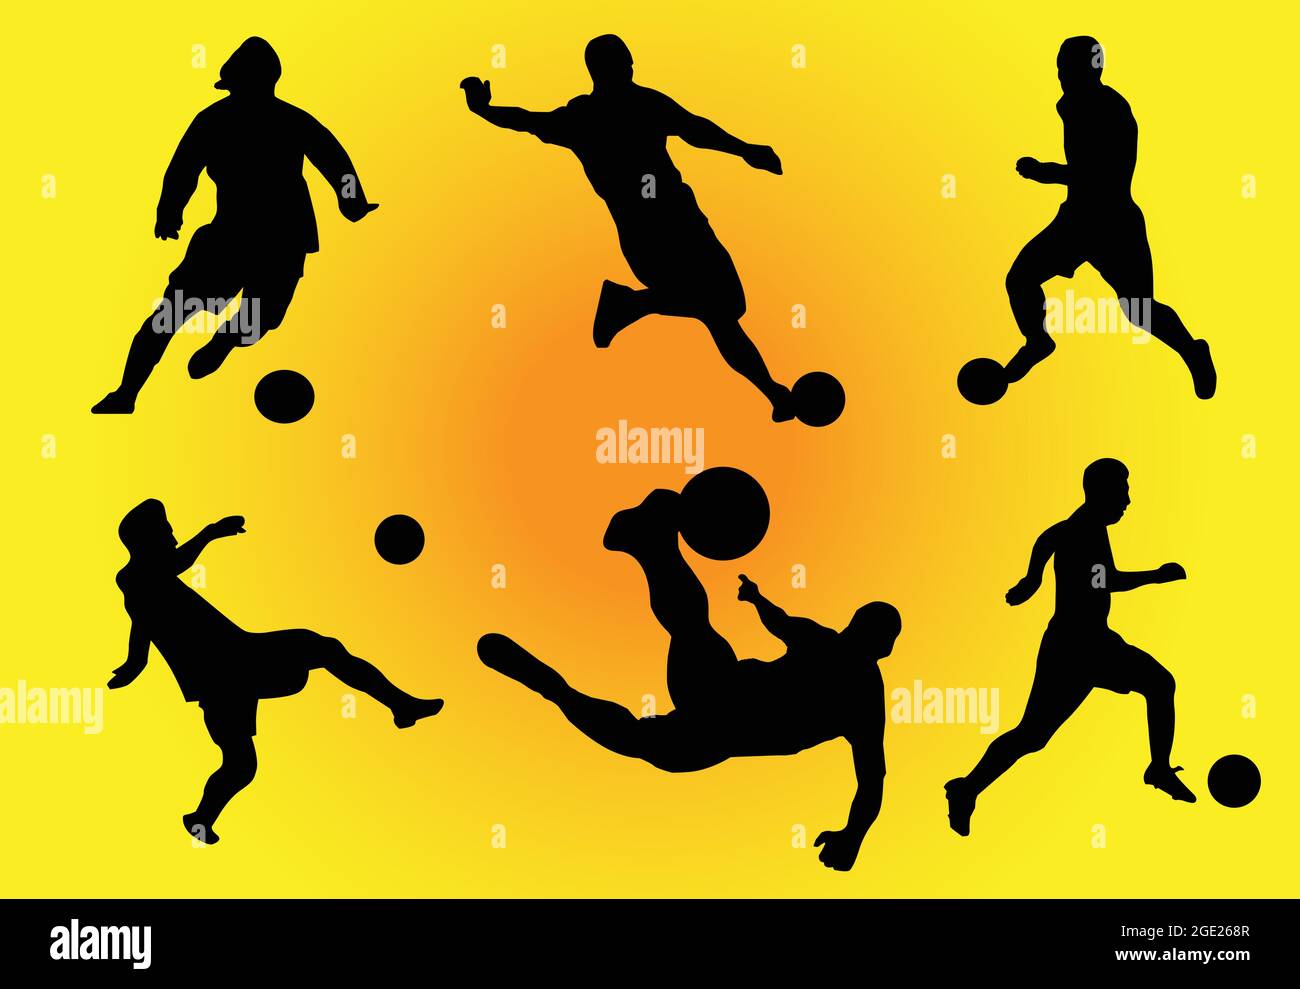 soccer player silhouette free vector